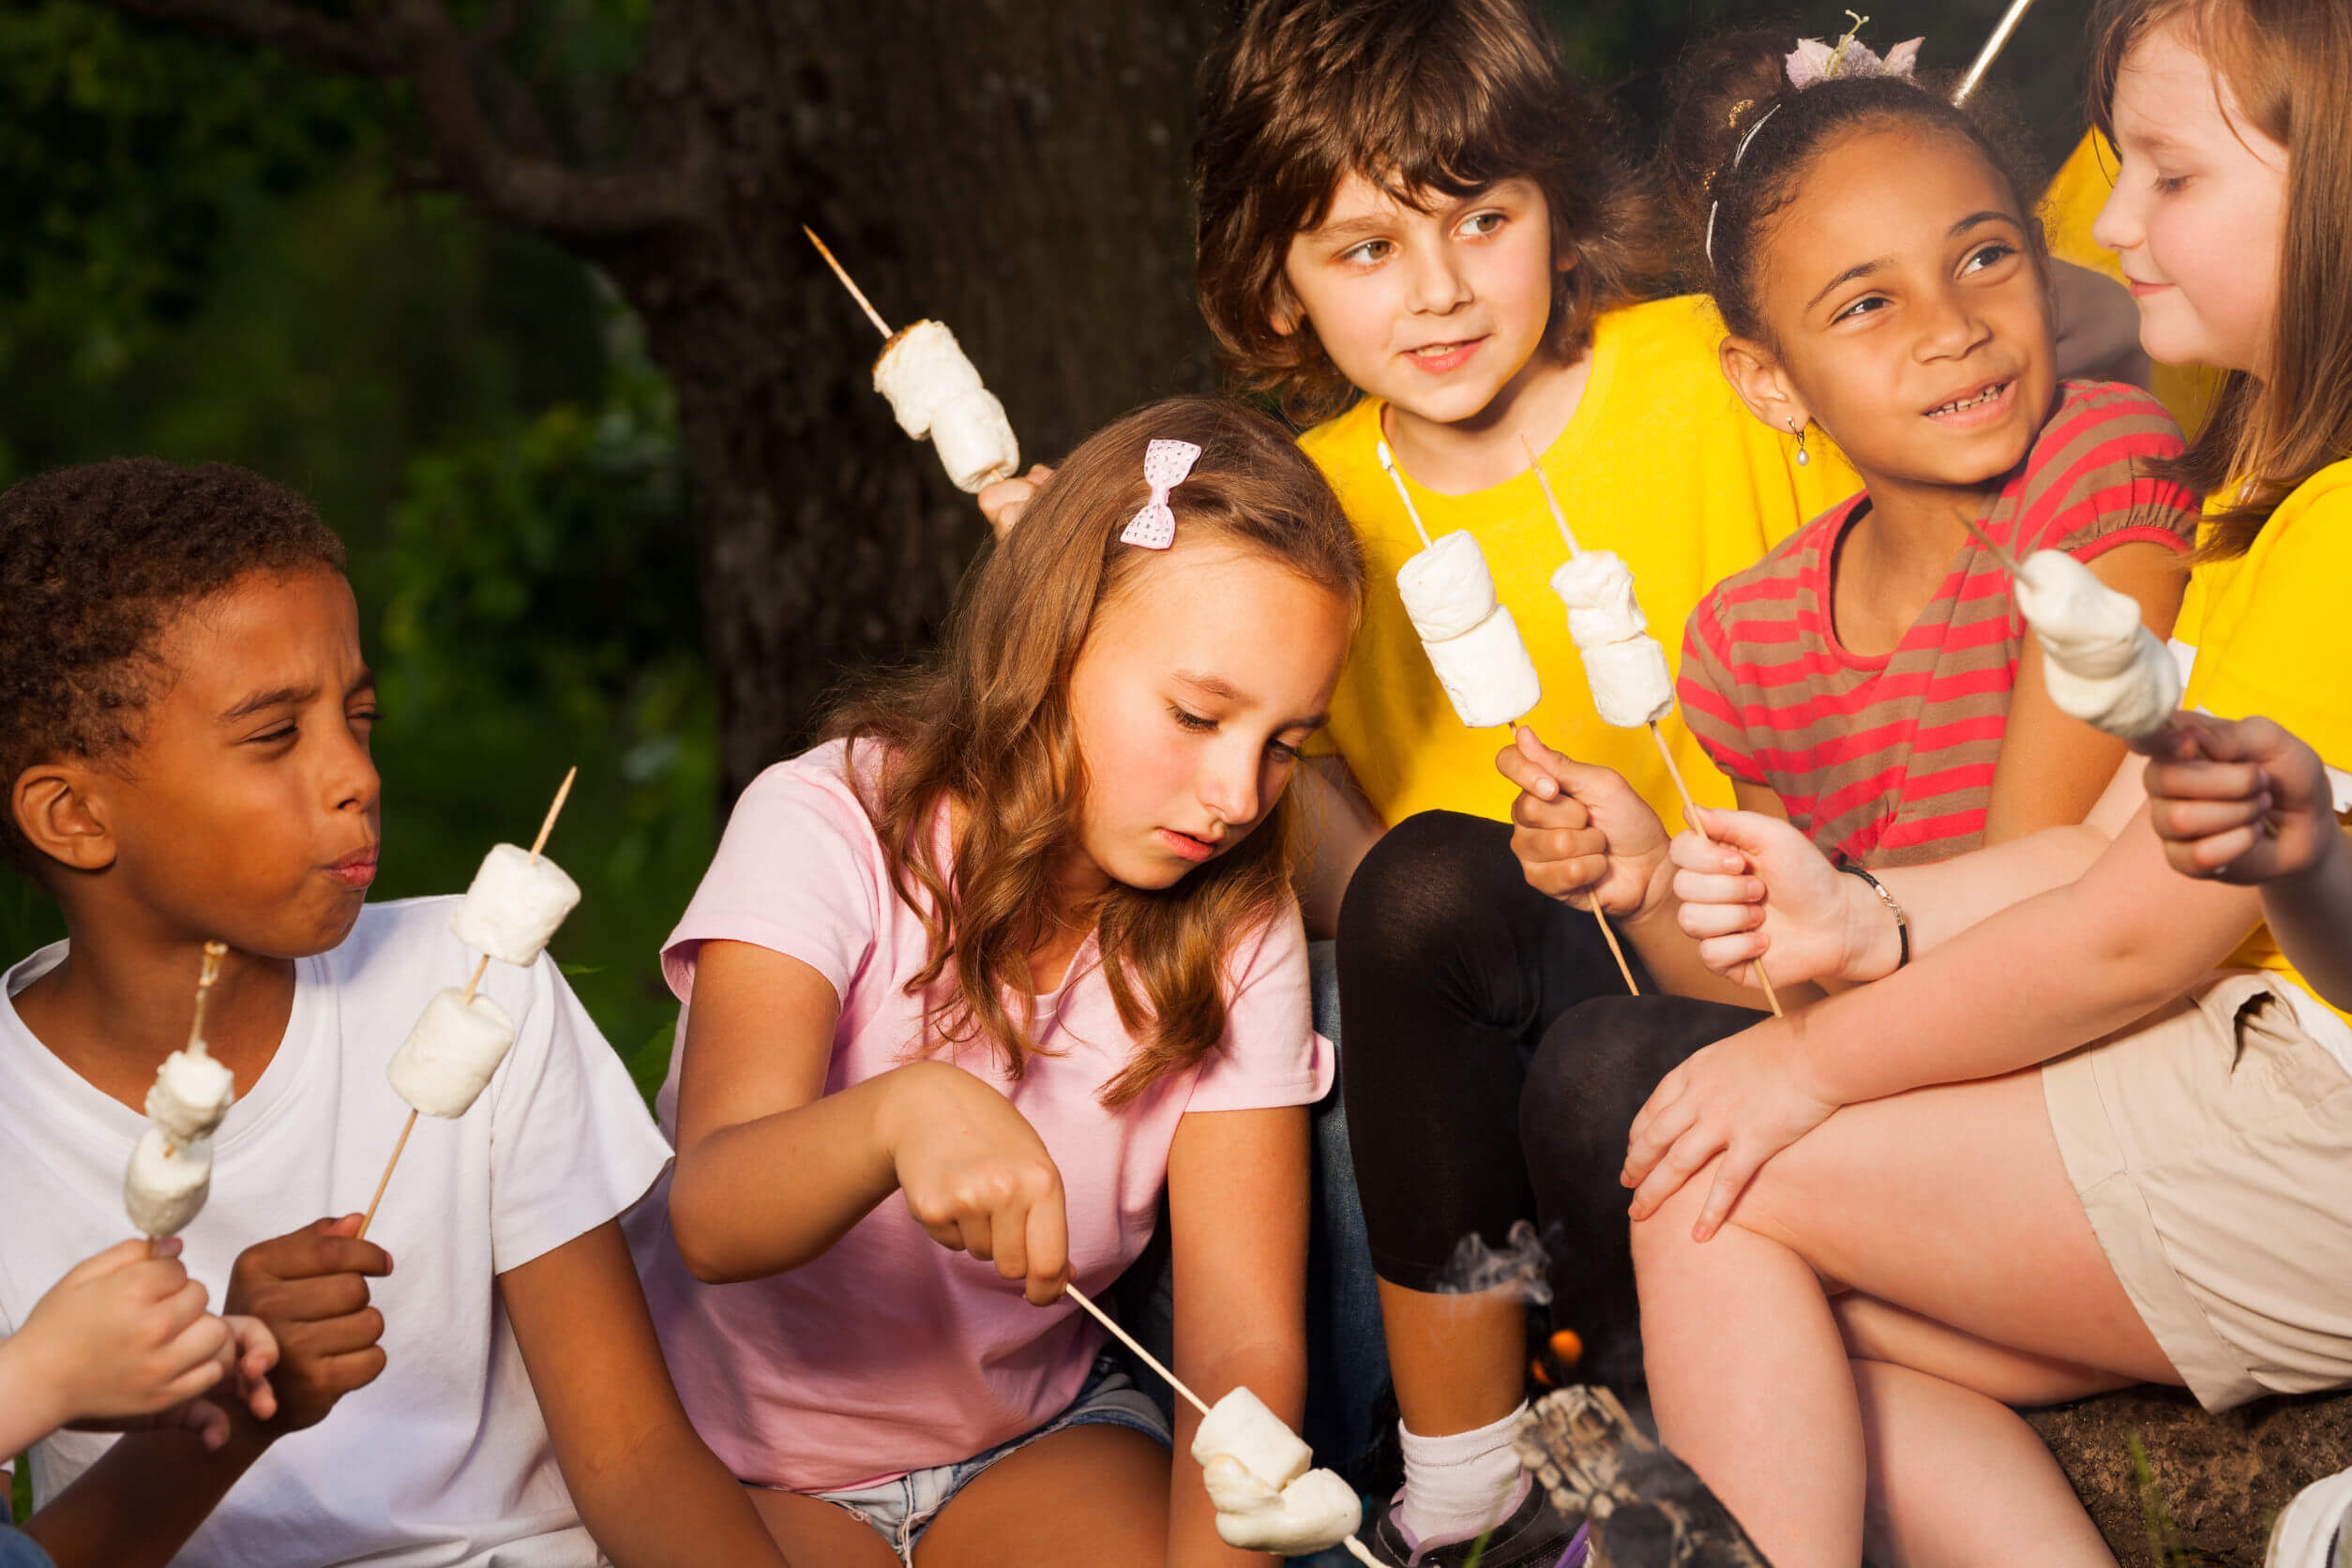 Injuries at Florida Summer Camps – How to Protect Your Kids and Family 1 Summer Camp Accidents South Florida Injury Law Firm